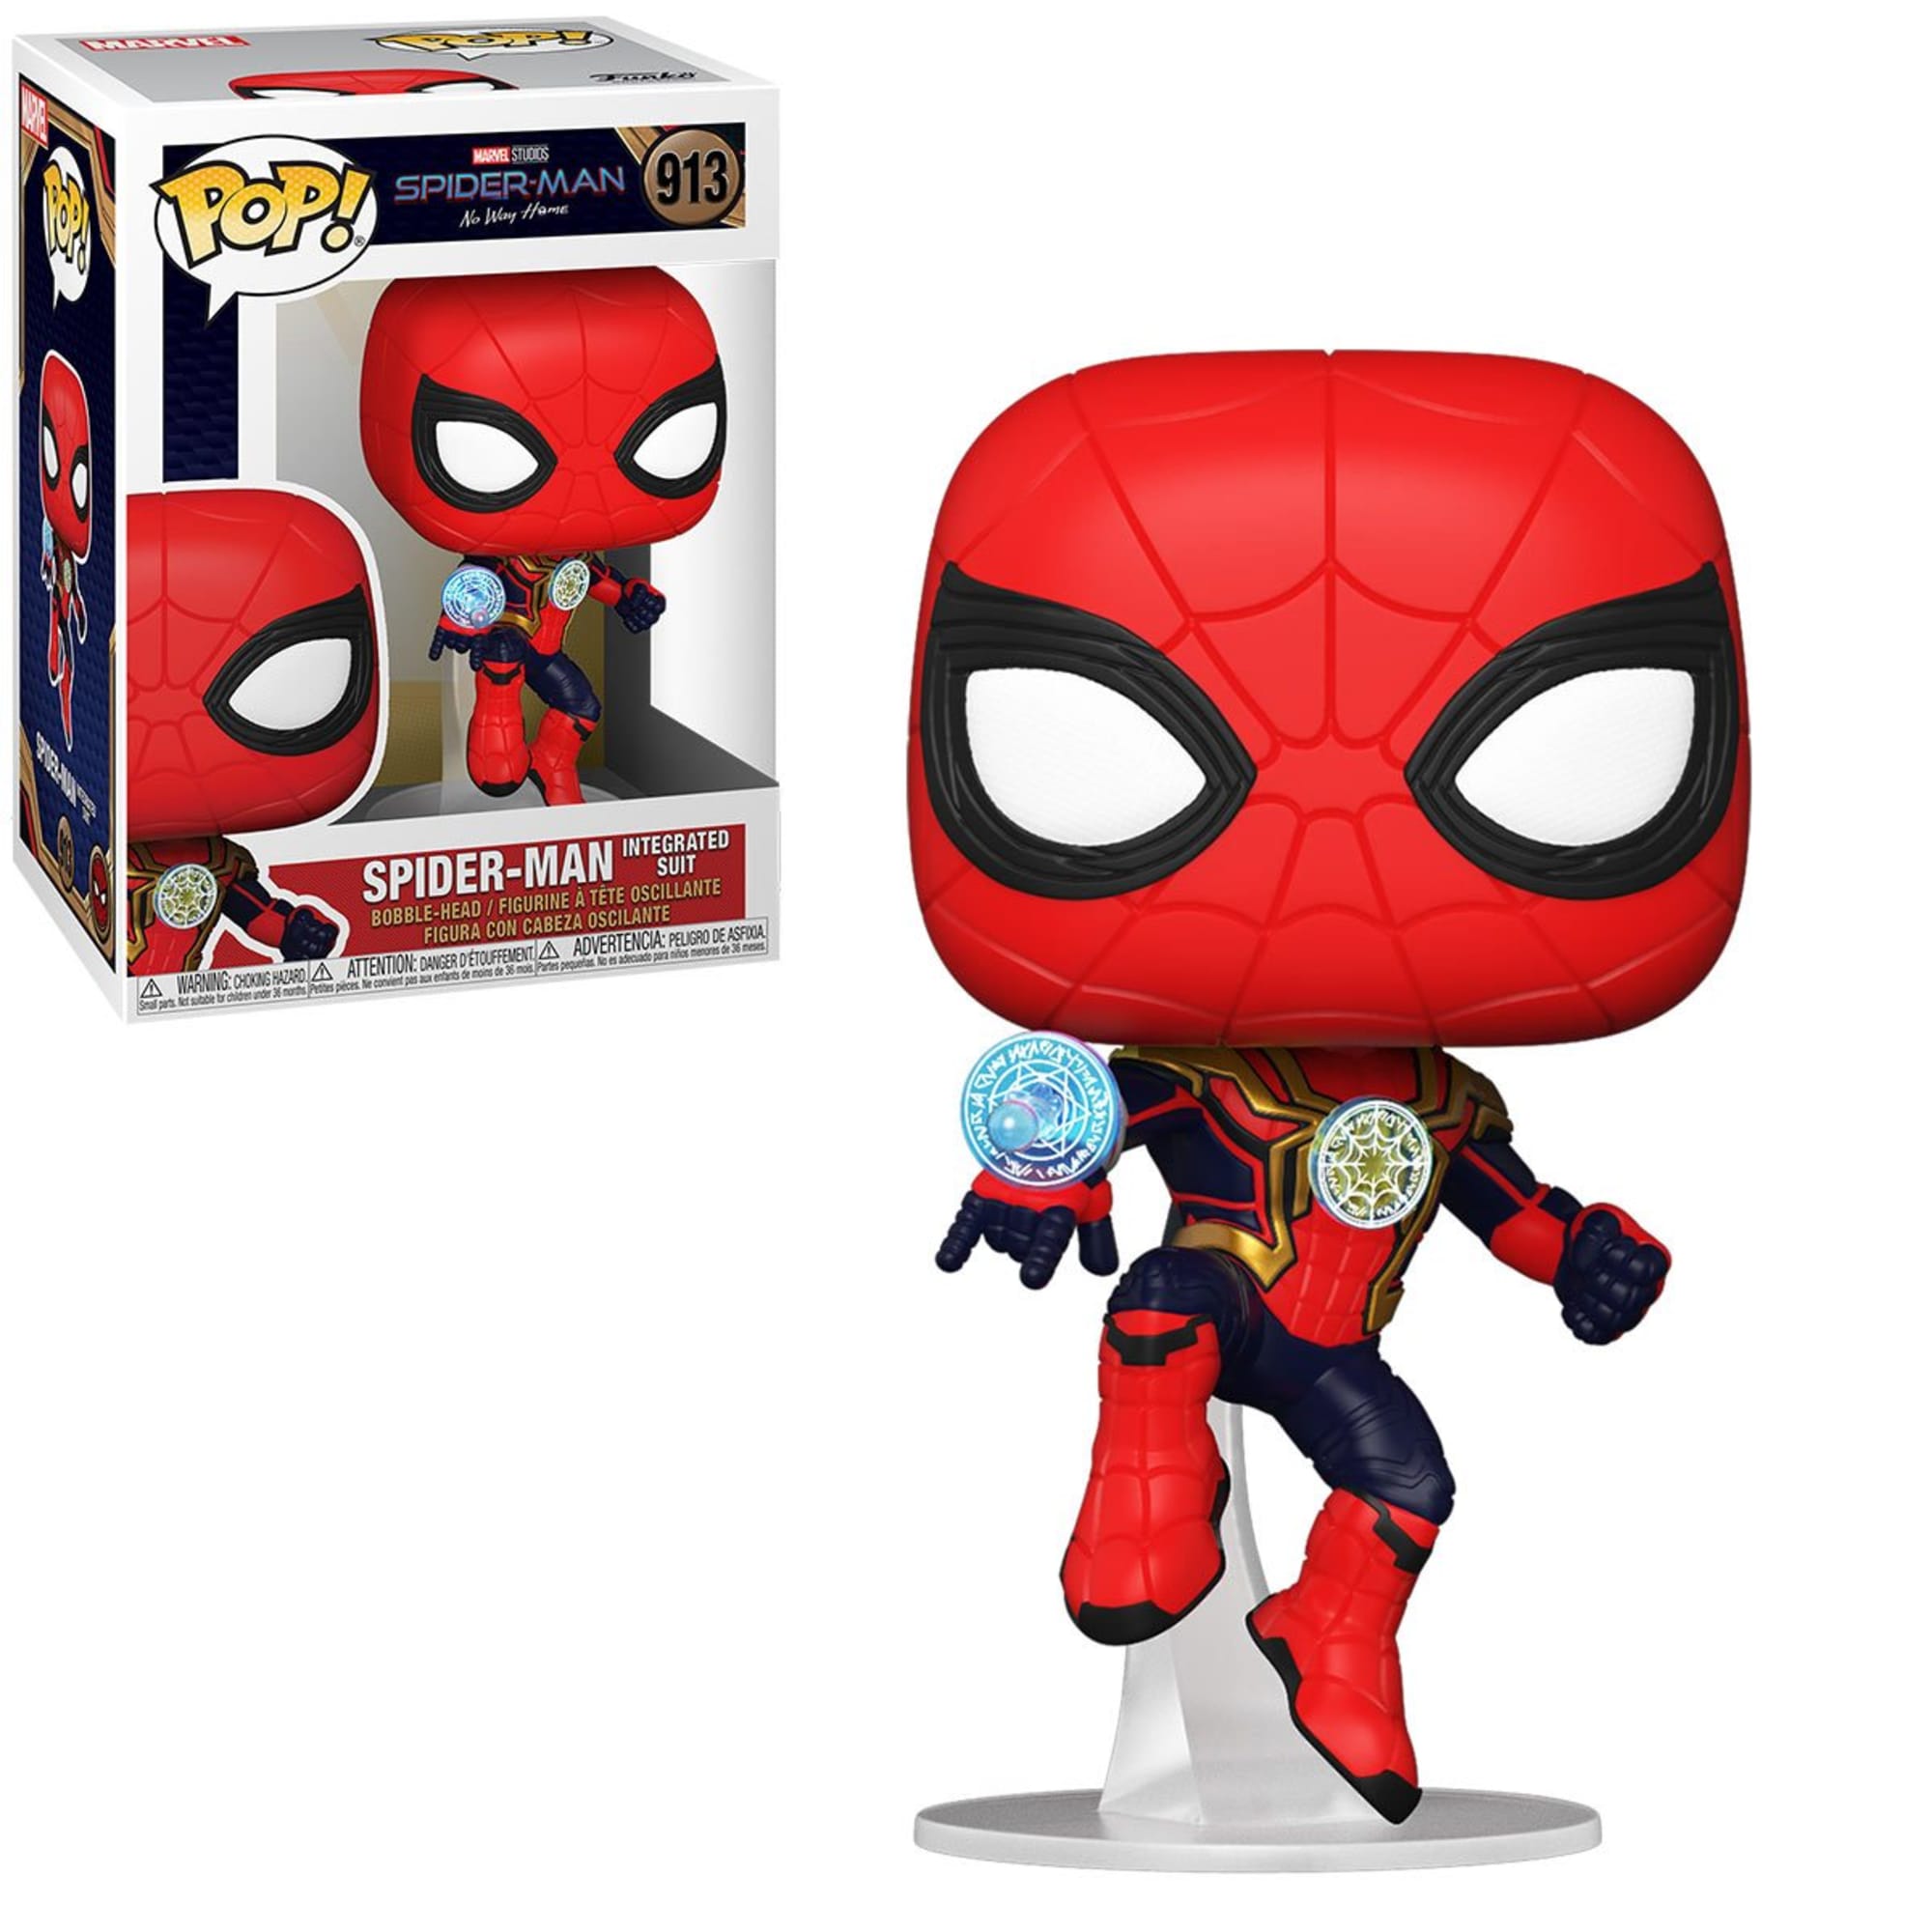 Get excited for SpiderMan No Way Home with new Funko Pop! figures